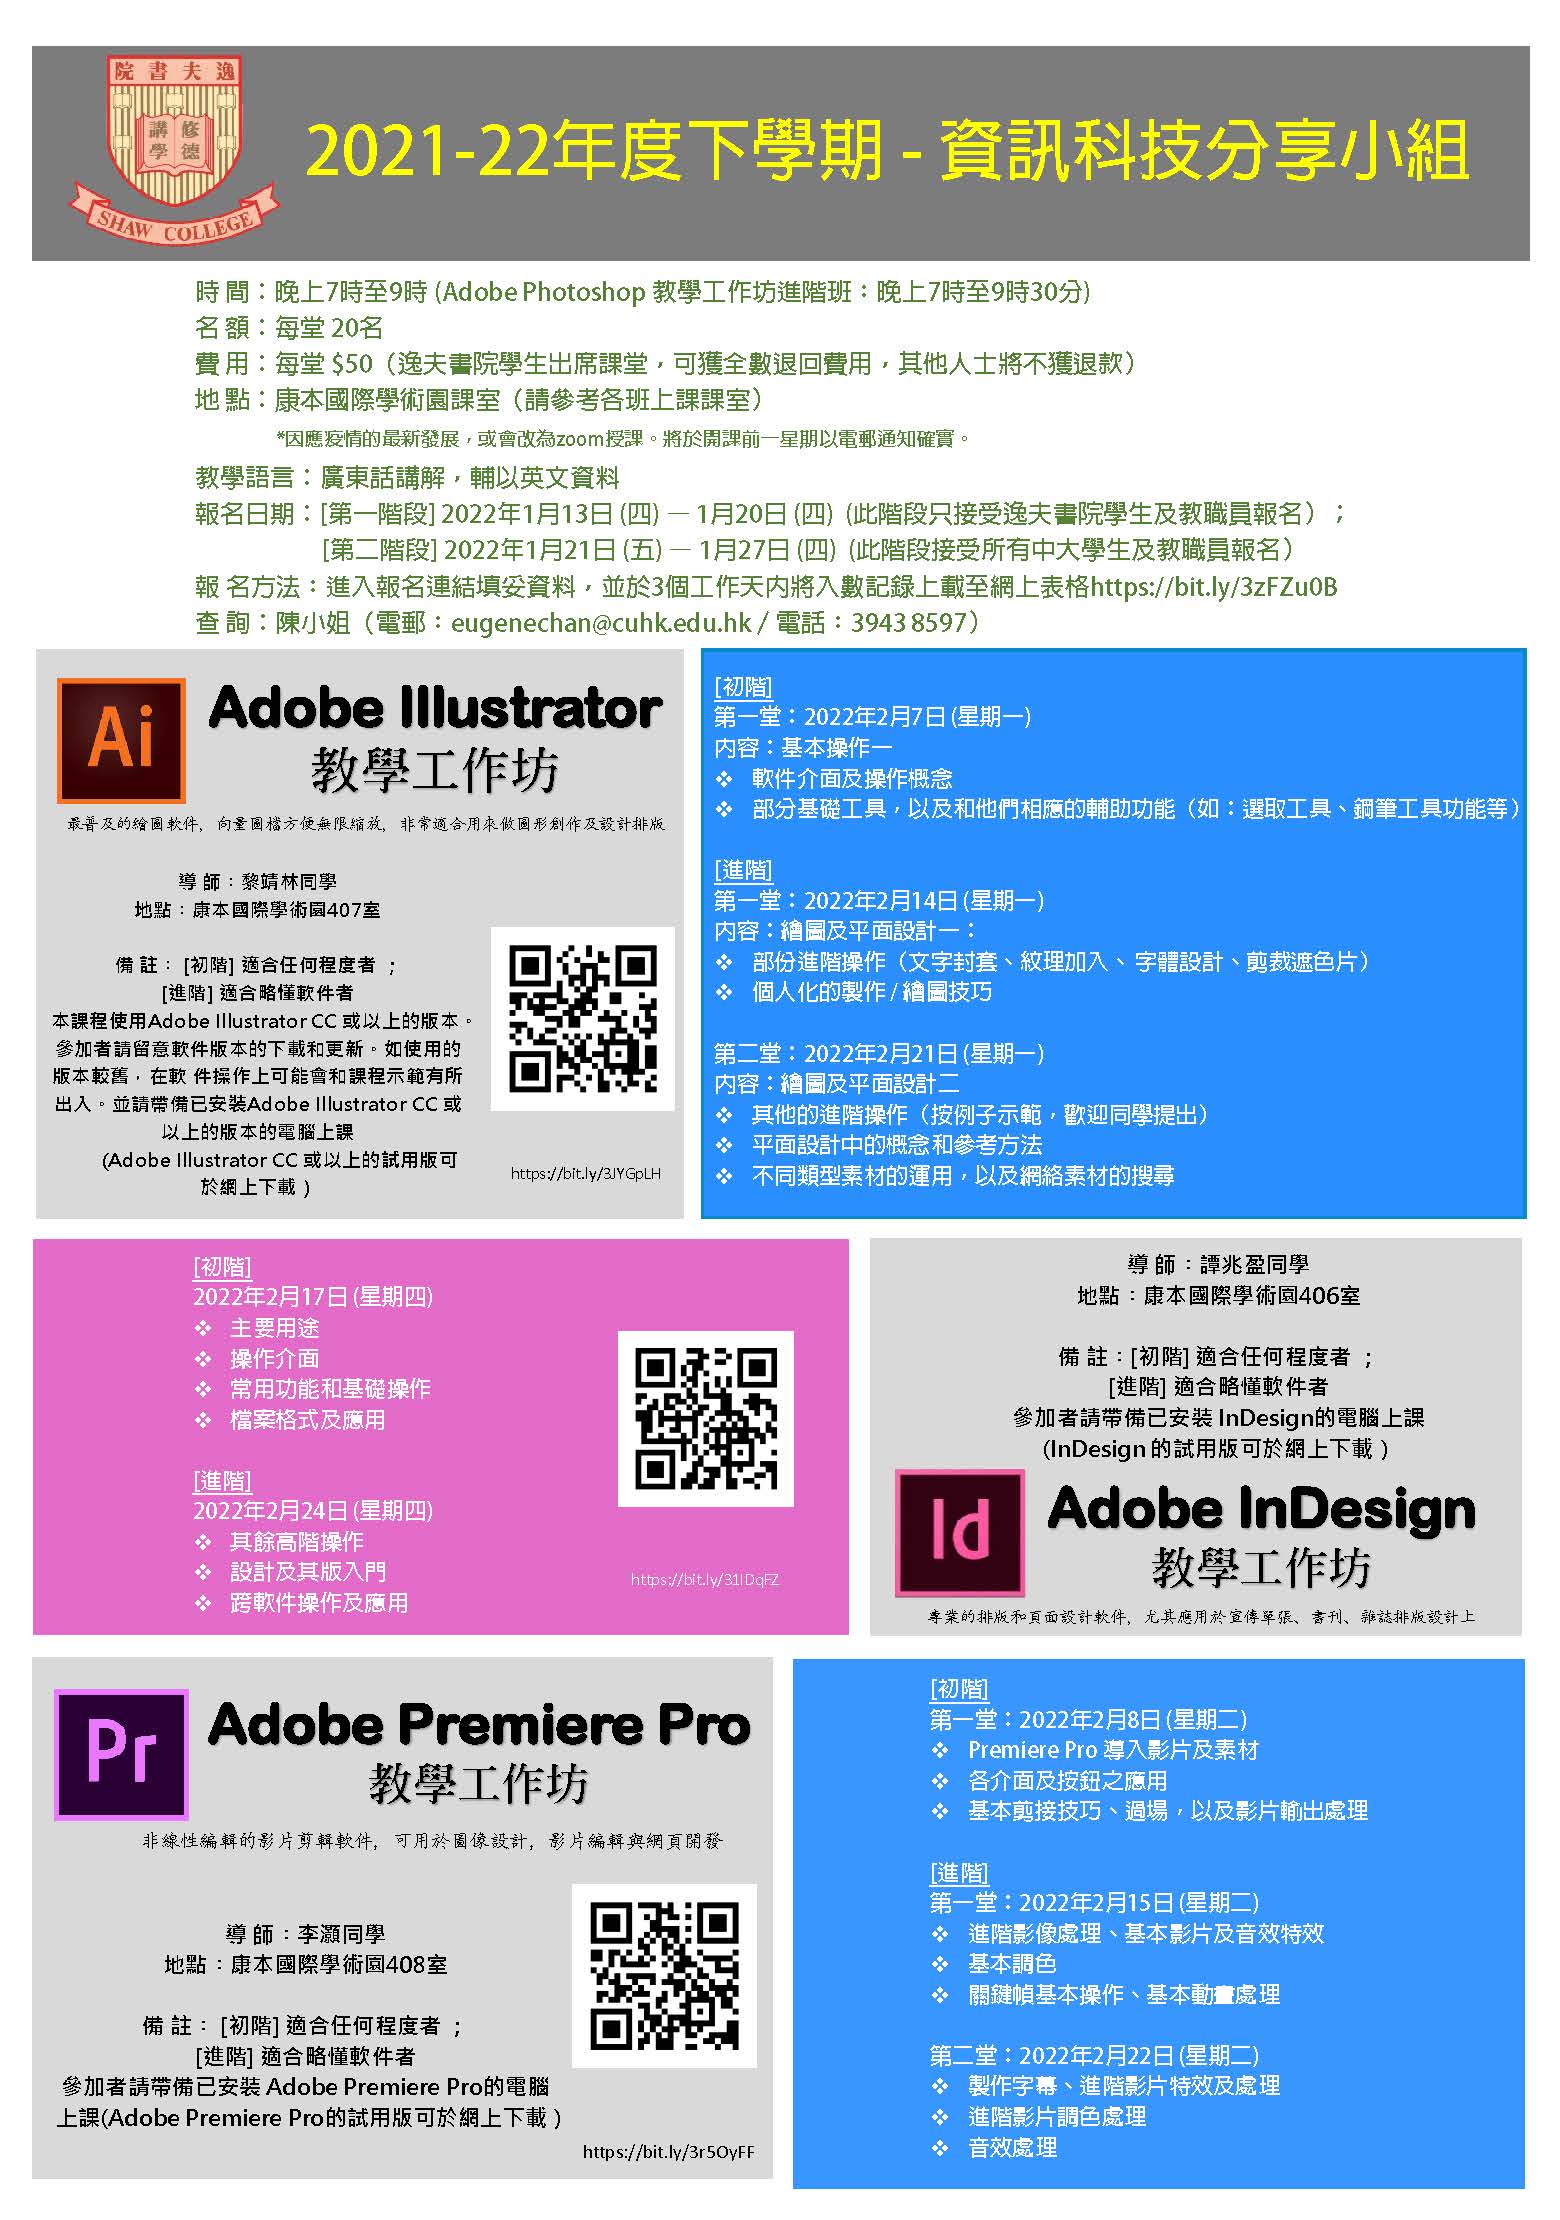 IT Sharing_InDesign